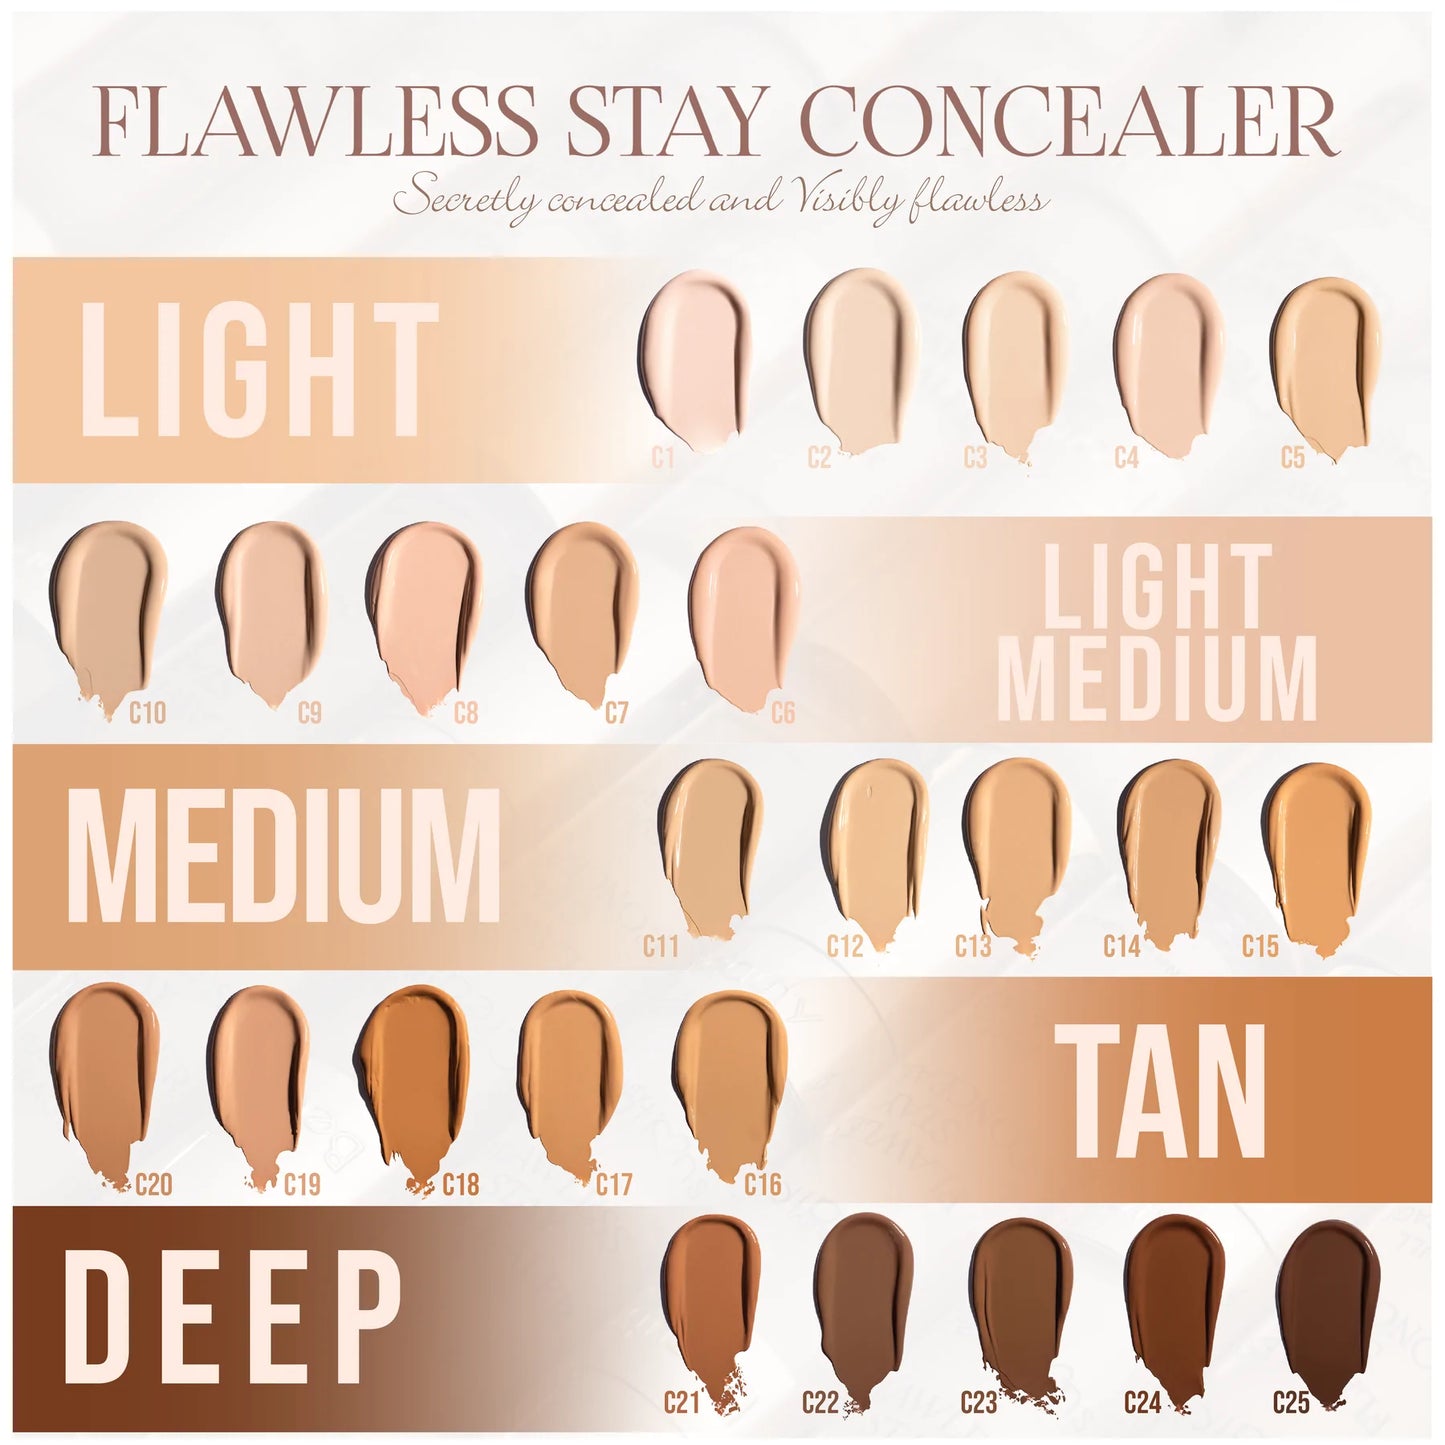 #C14 - Flawless Stay Concealer